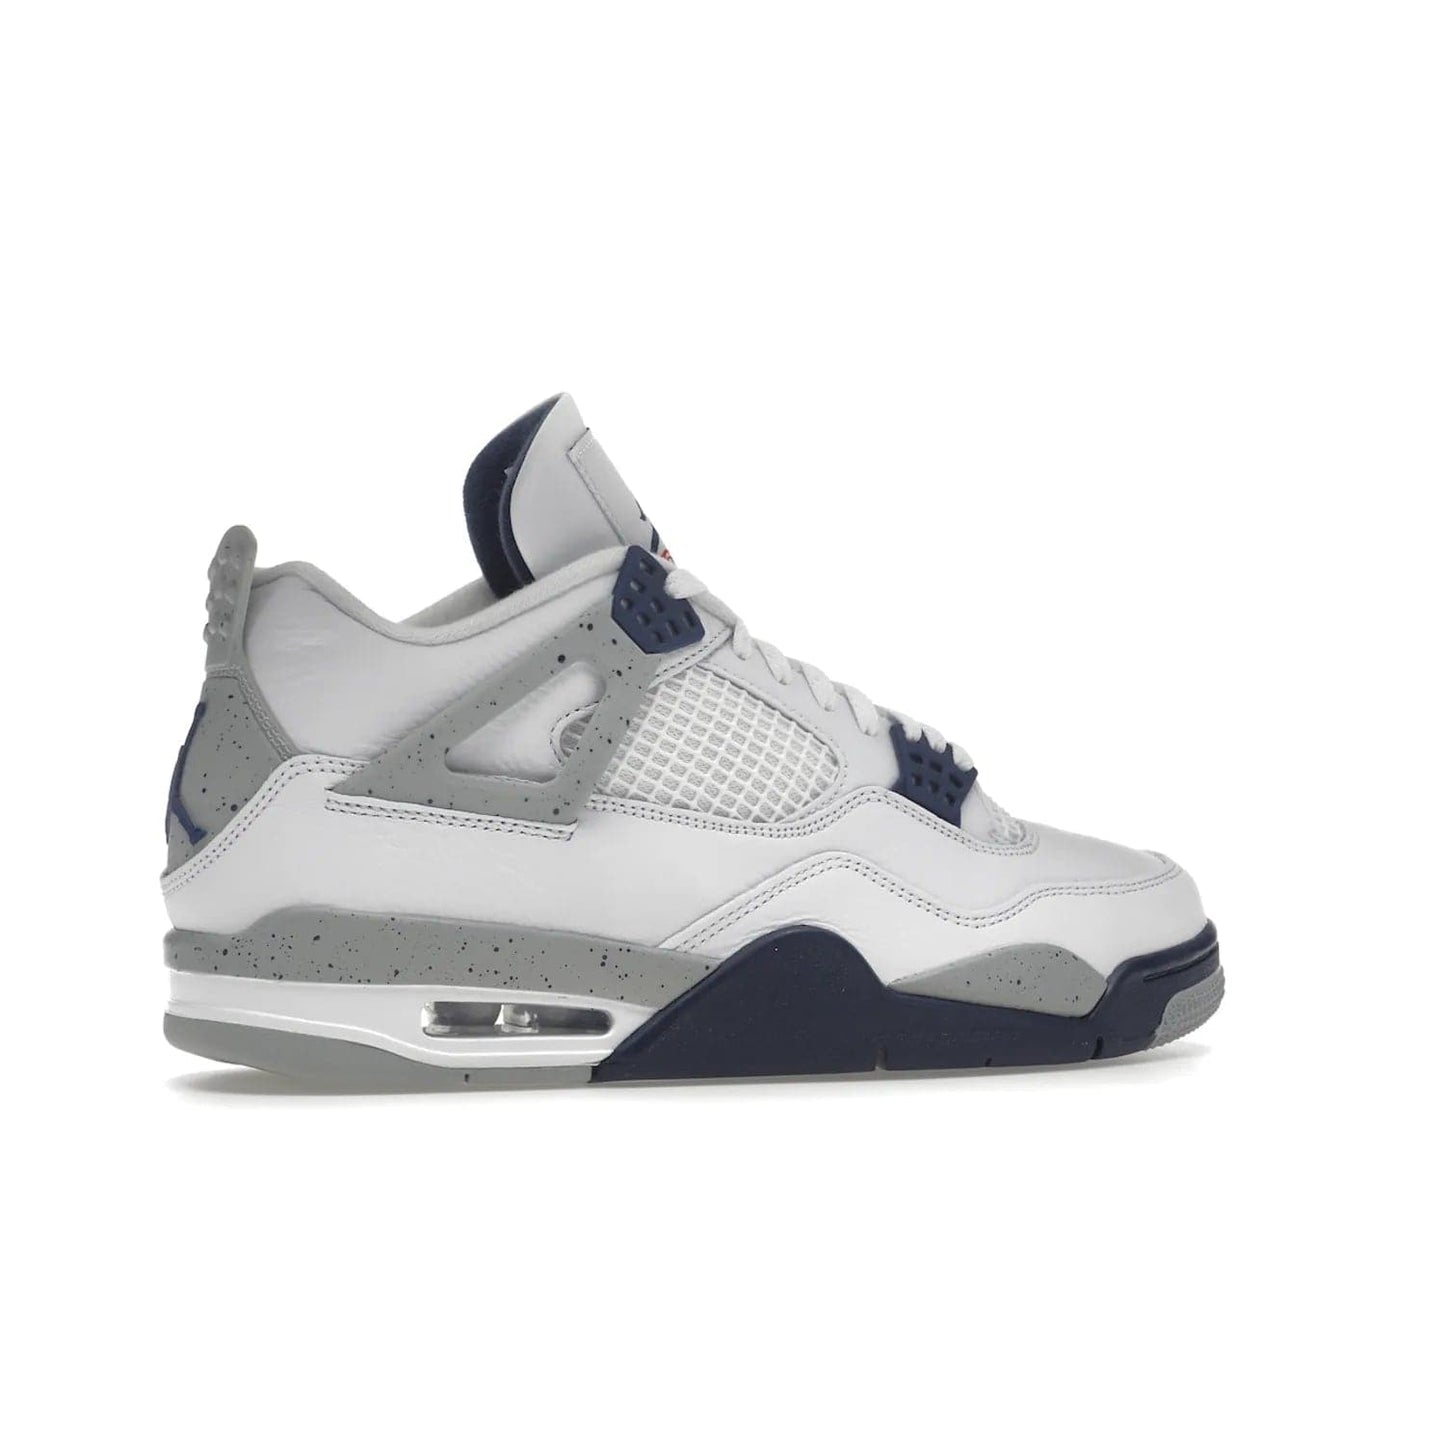 Jordan 4 Retro Midnight Navy - Image 35 - Only at www.BallersClubKickz.com - Shop the Air Jordan Retro 4 White Midnight Navy. Stand out with a classic white leather upper, black support wings, midnight navy eyelets, and Crimson Jumpman tongue tag. Unbeatable comfort with two-tone polyurethane midsole with encapsulated Air technology. Get yours before October 29th, 2022.